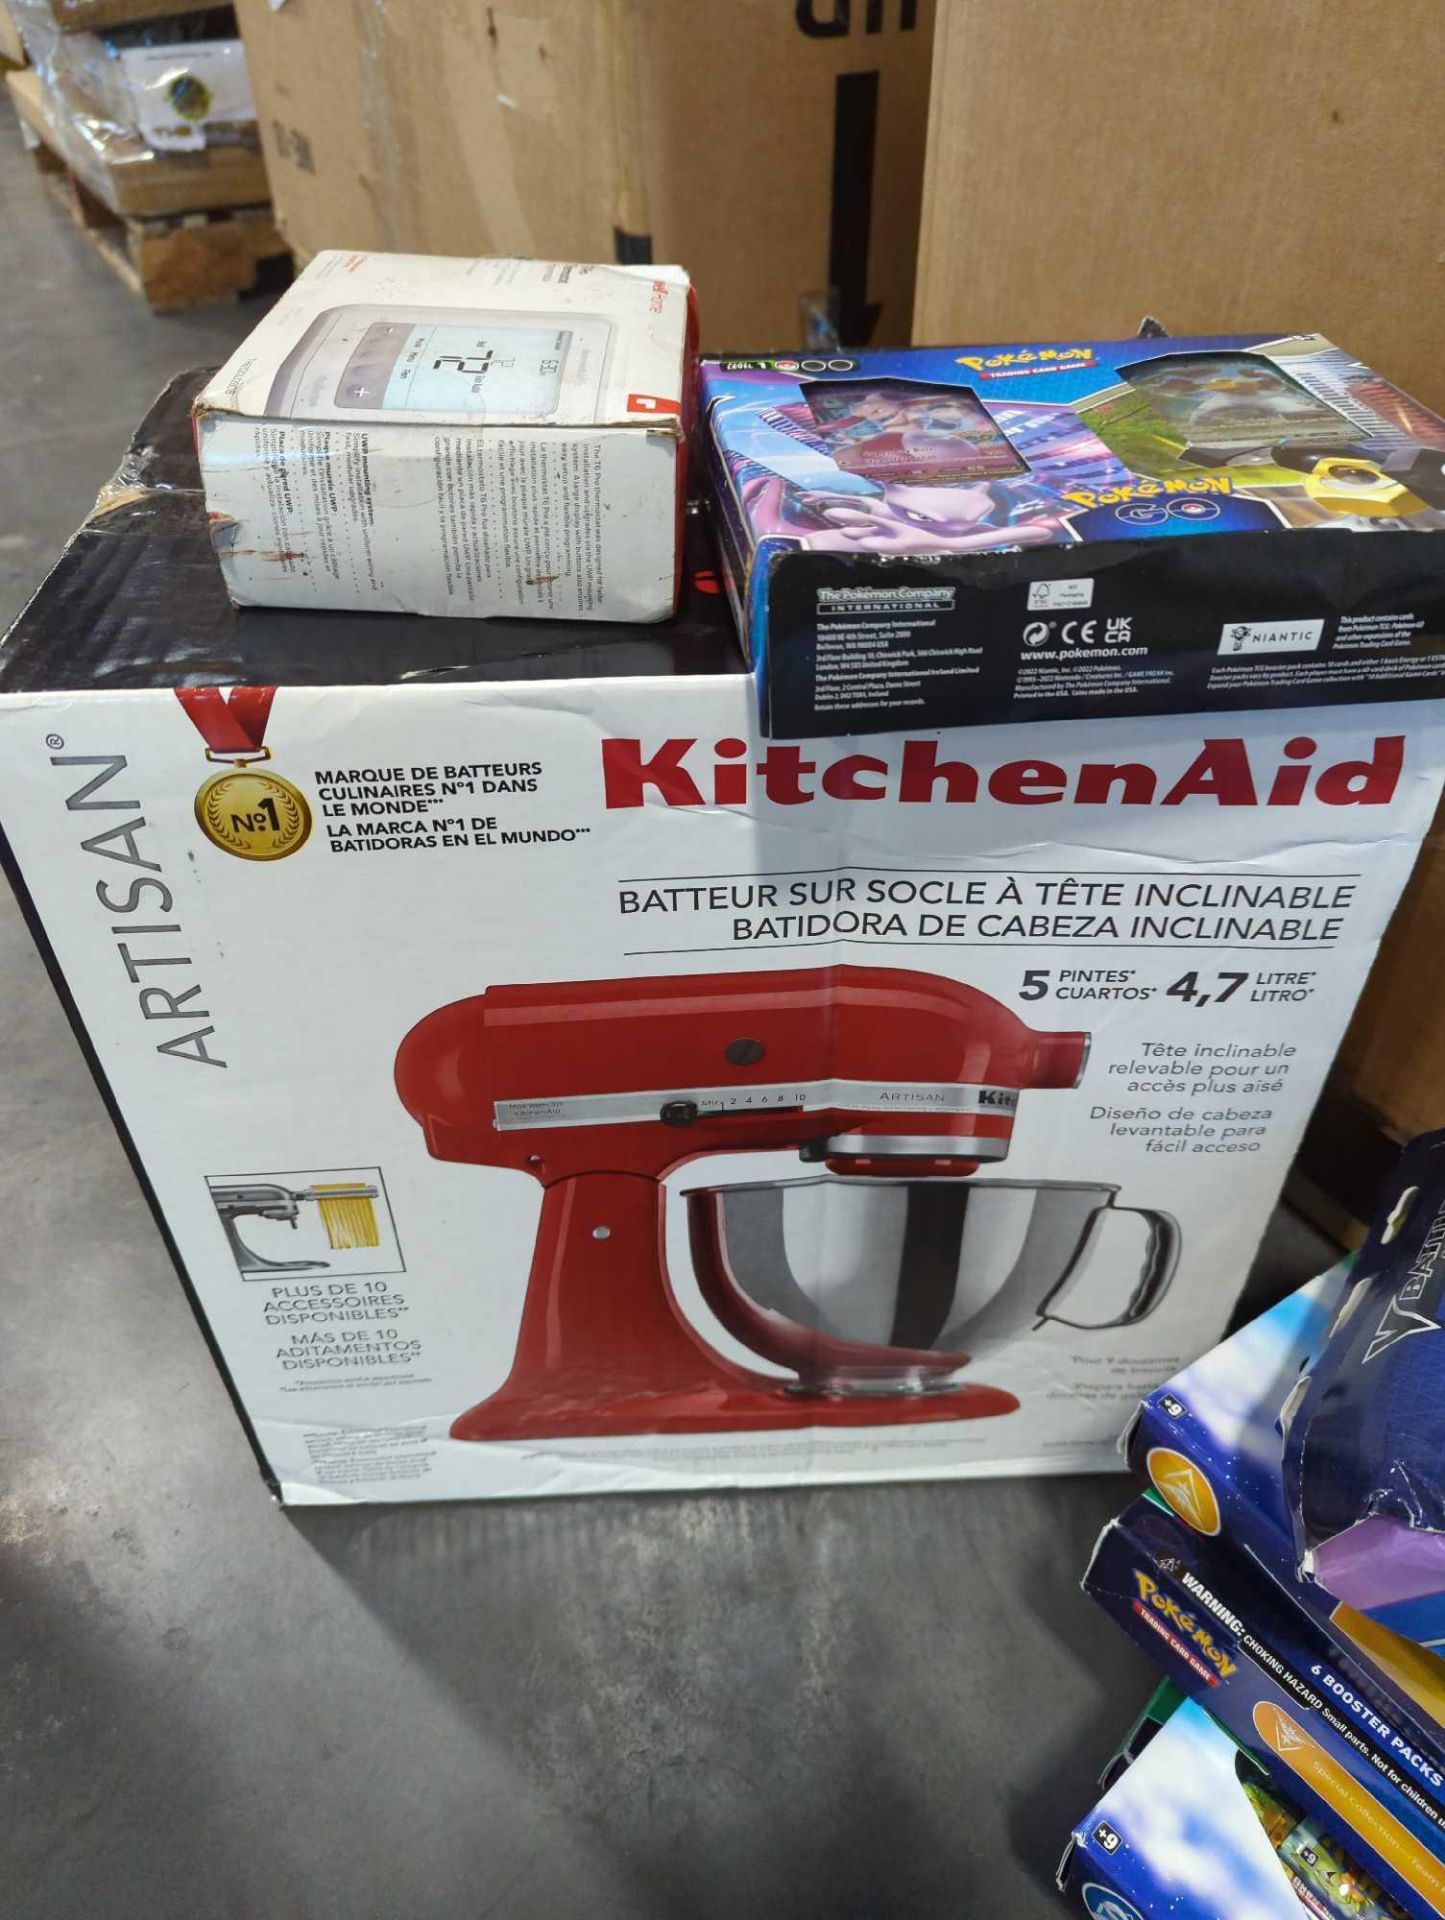 Kitchenaid stand mixer, pokemon cards, and more - Image 16 of 18